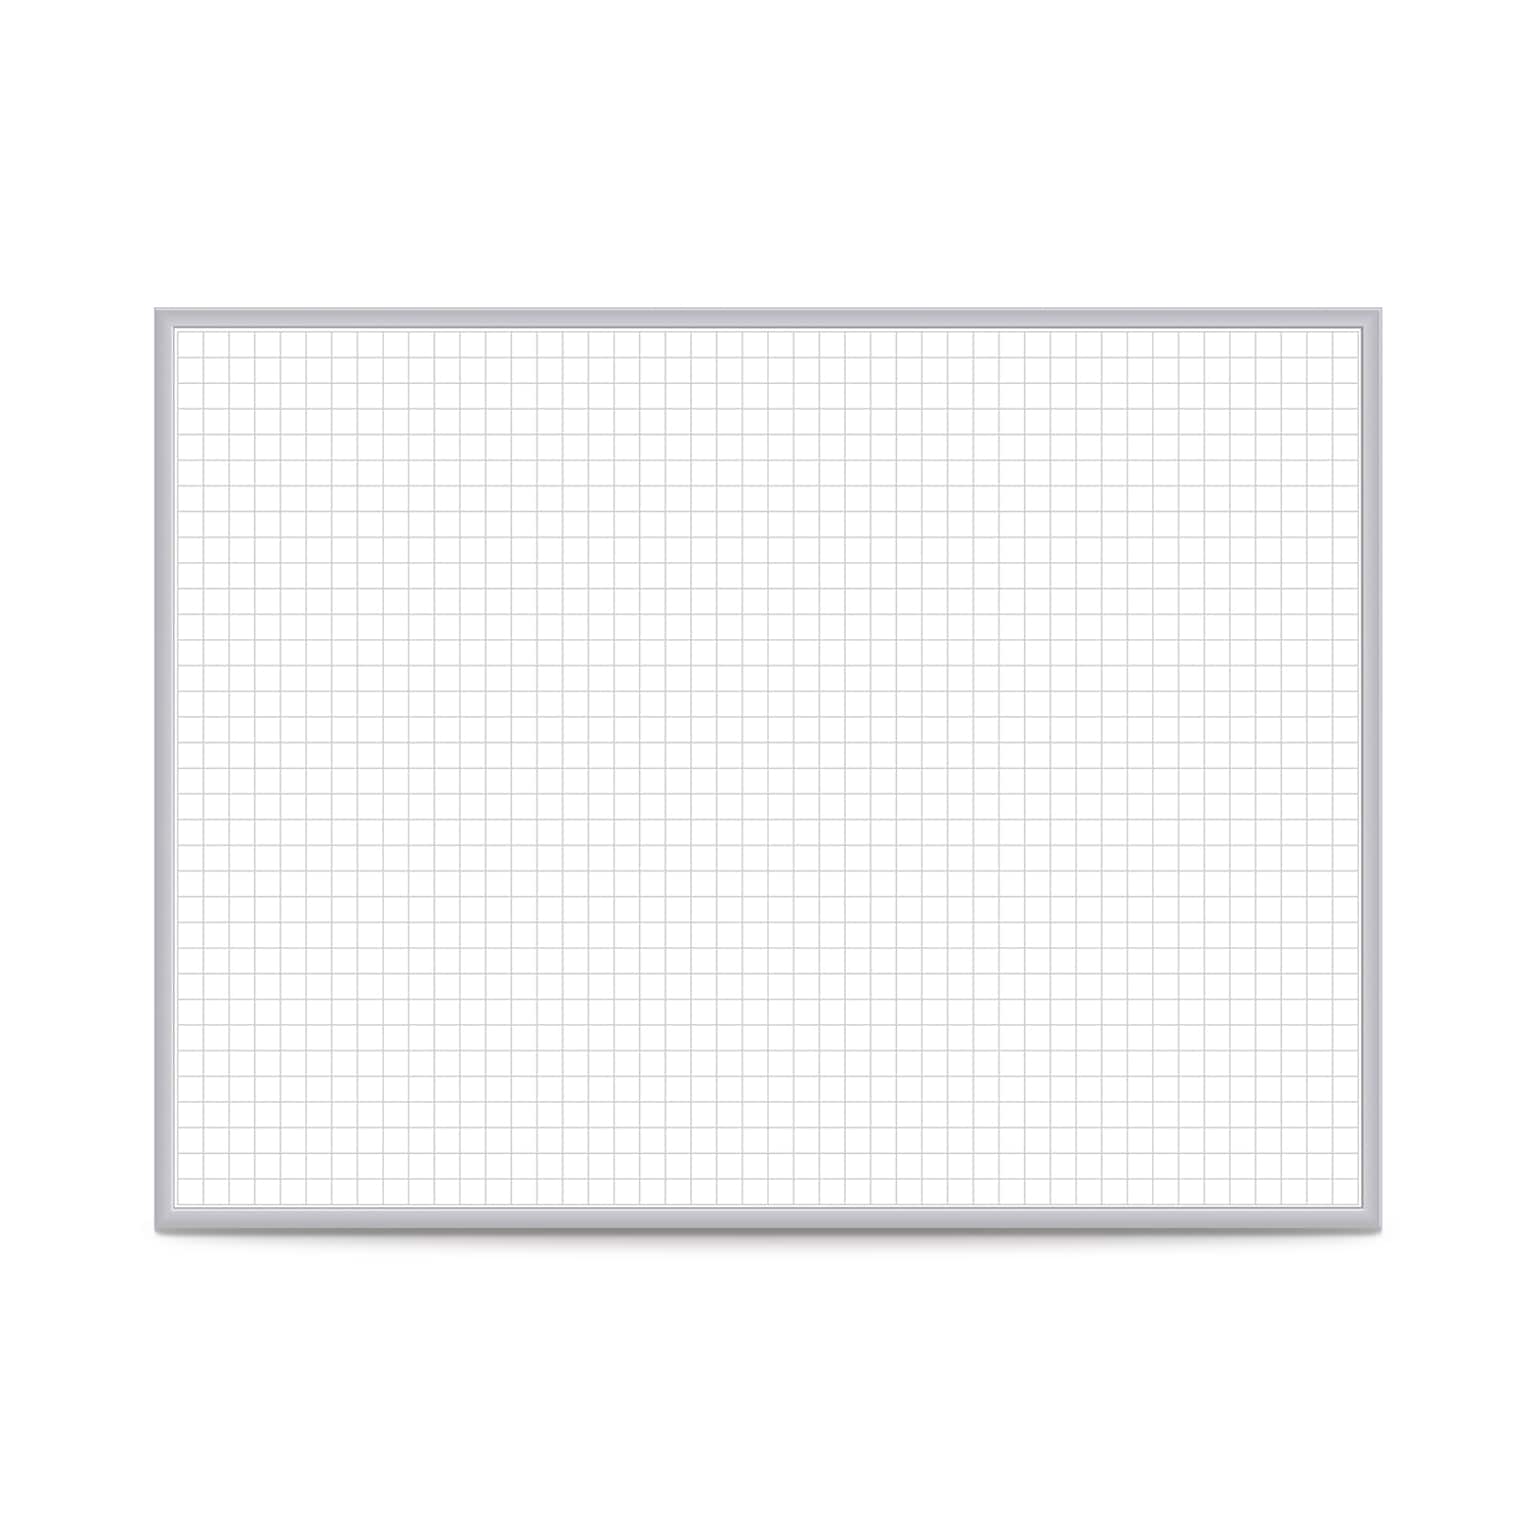 Ghent 1 x 1 Grid Magnetic Whiteboard, 3H x 4W (GRPM321G-34)